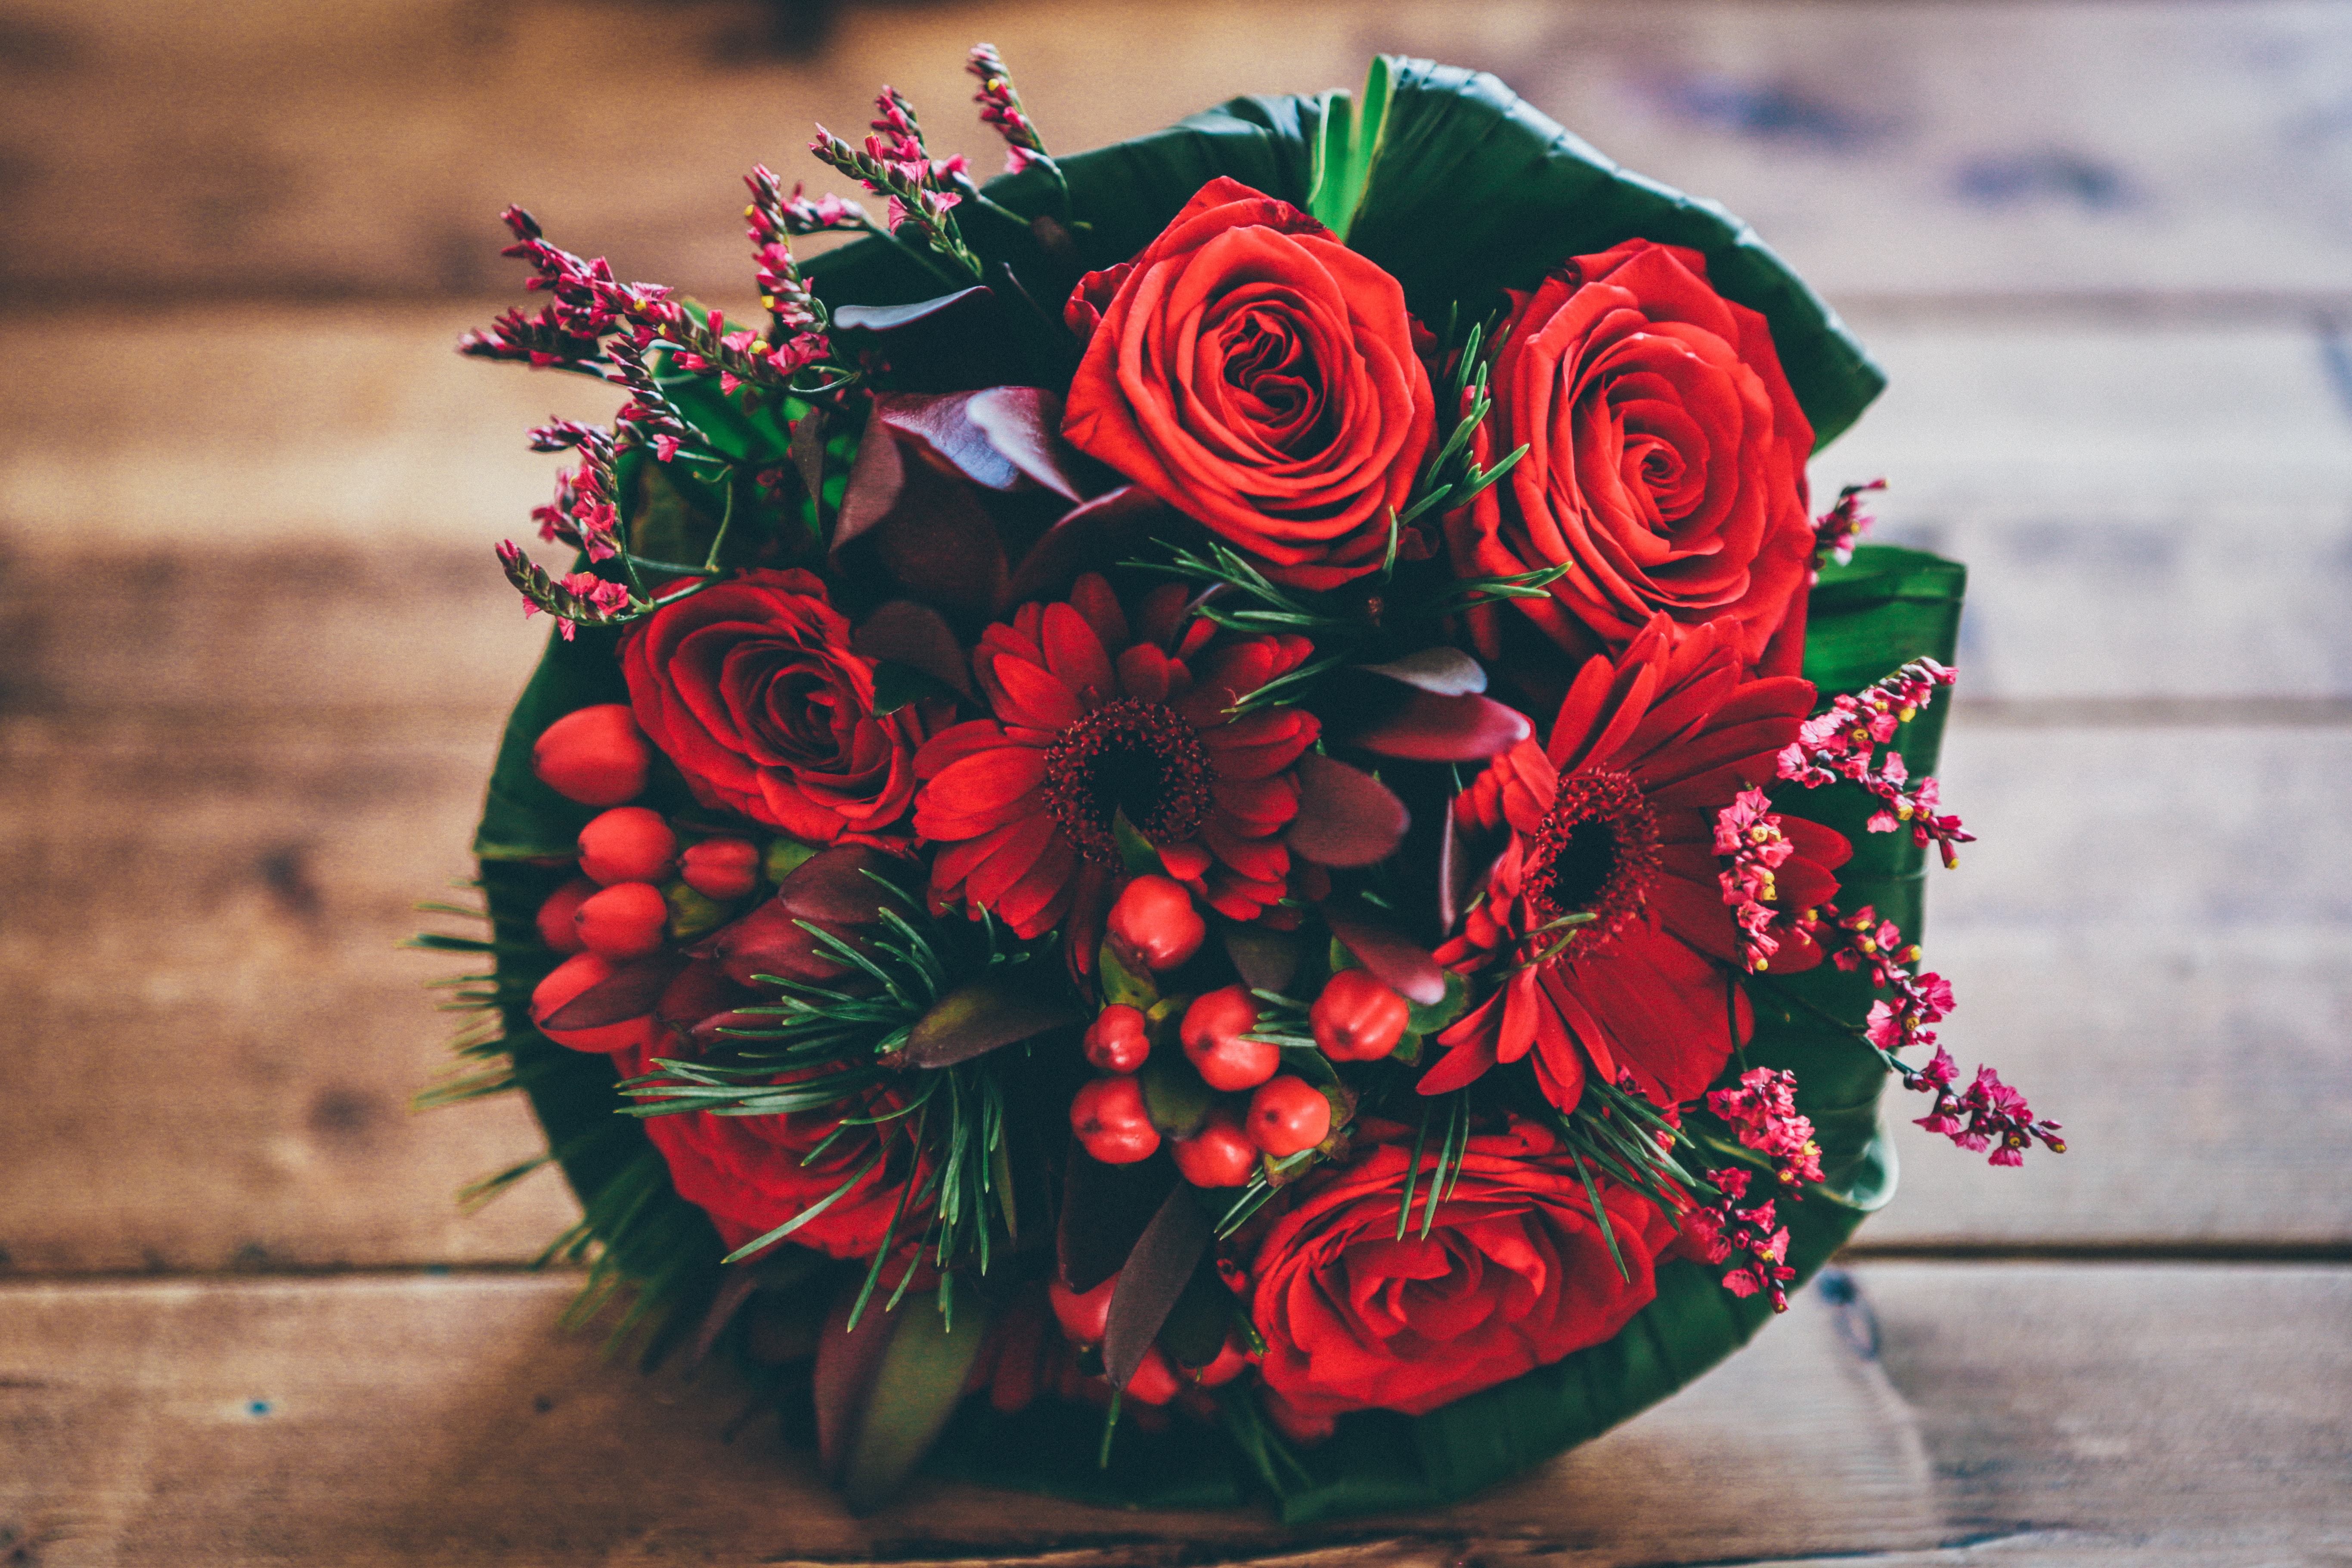 116319 download wallpaper roses, flowers, red, bouquet, composition screensavers and pictures for free